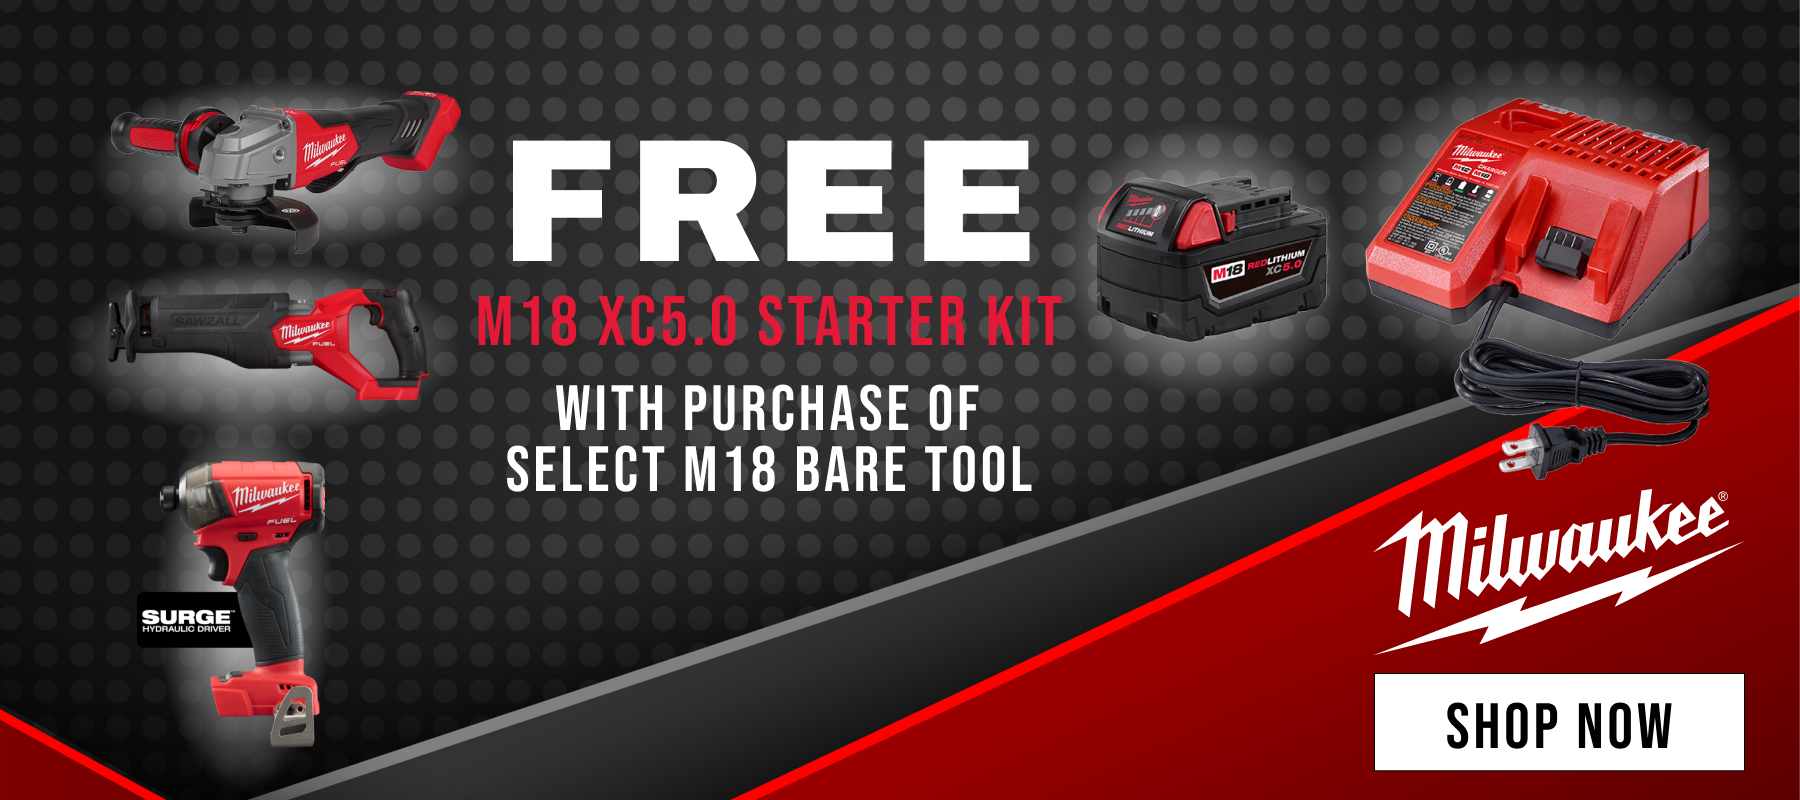 Milwaukee // FREE M18 XC5.0 Starter Kit with Purchase of Select M18 Bare Tool // SHOP NOW